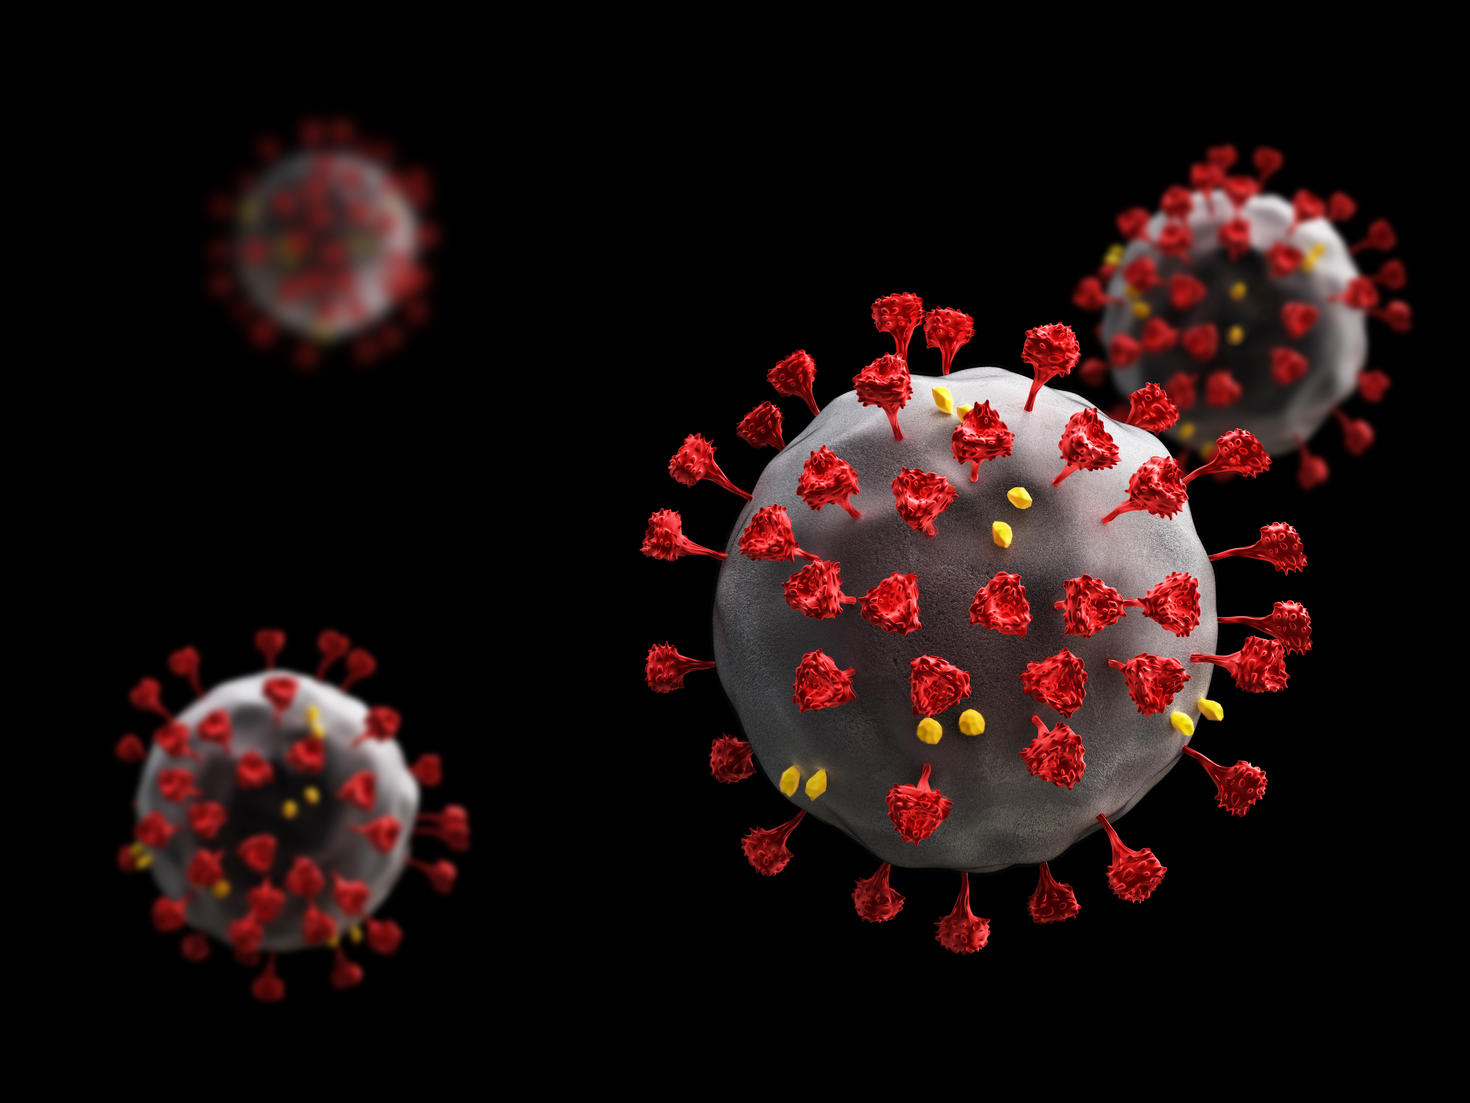 Size Comparison Between Germ Pm 25 And Coronavirus Stock Illustration -  Download Image Now - iStock